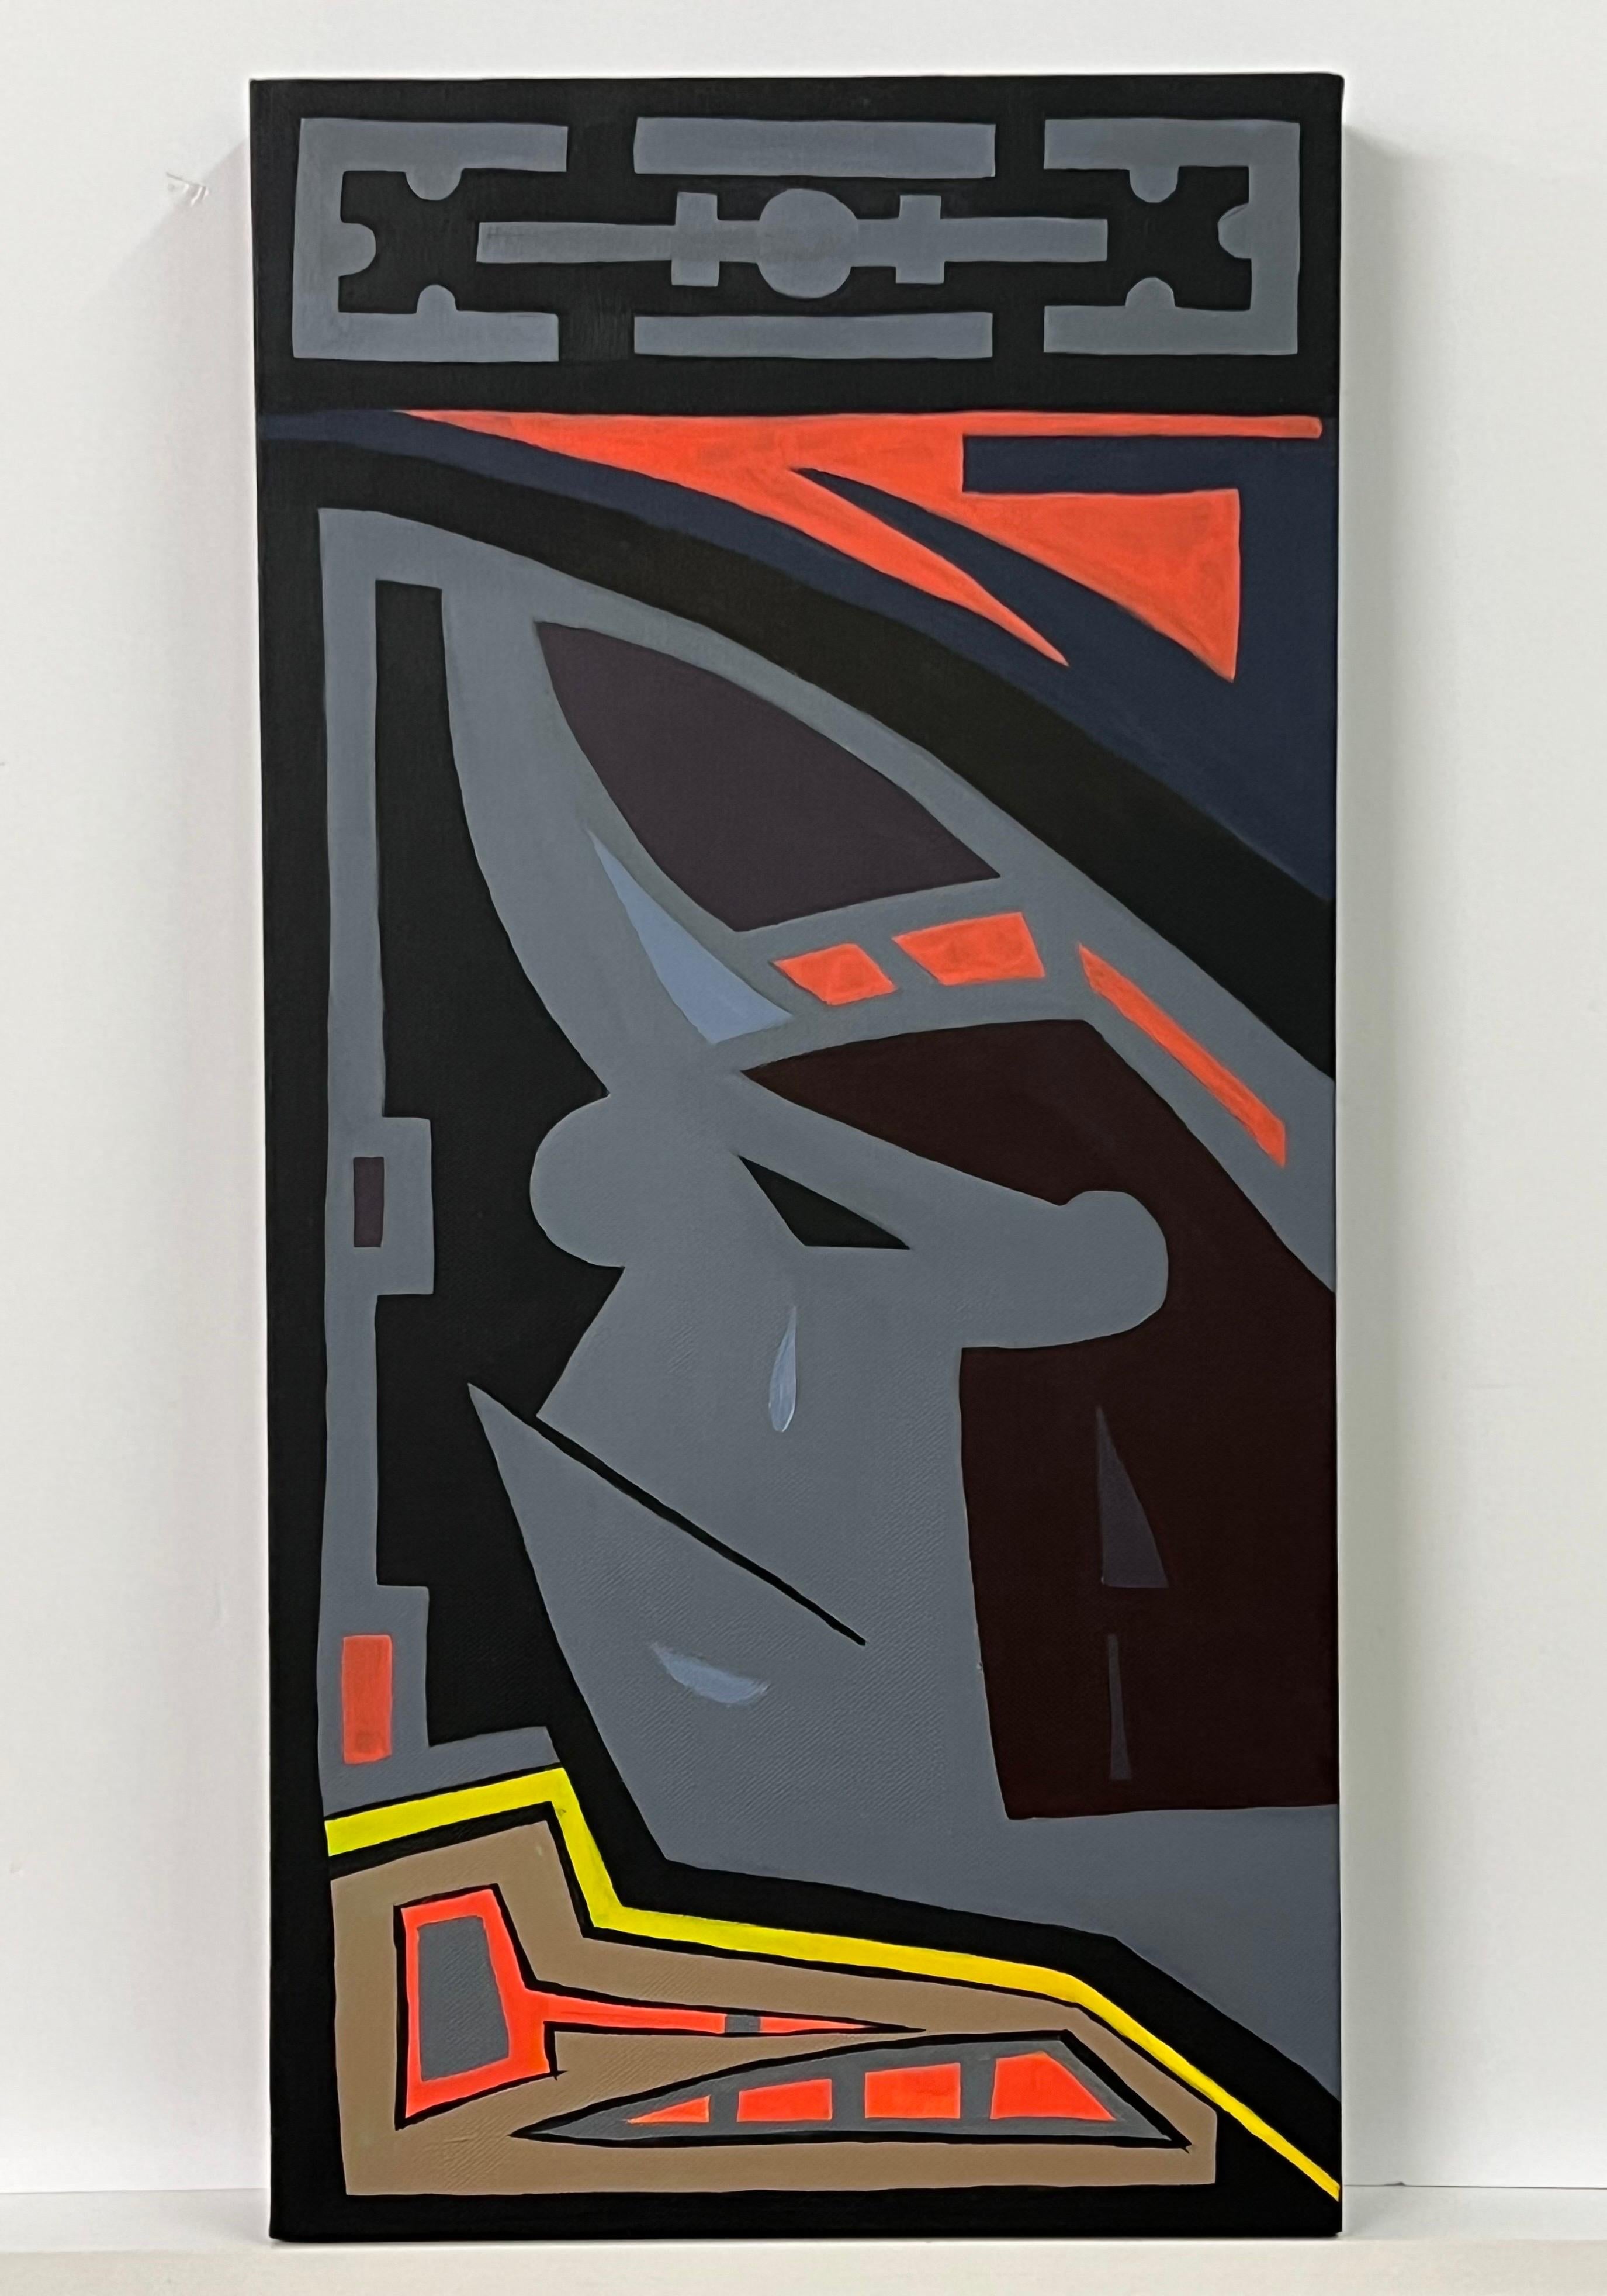 'Crying Aztec' Tribal Cartoon Painting on Canvas by Contemporary British Artist For Sale 1